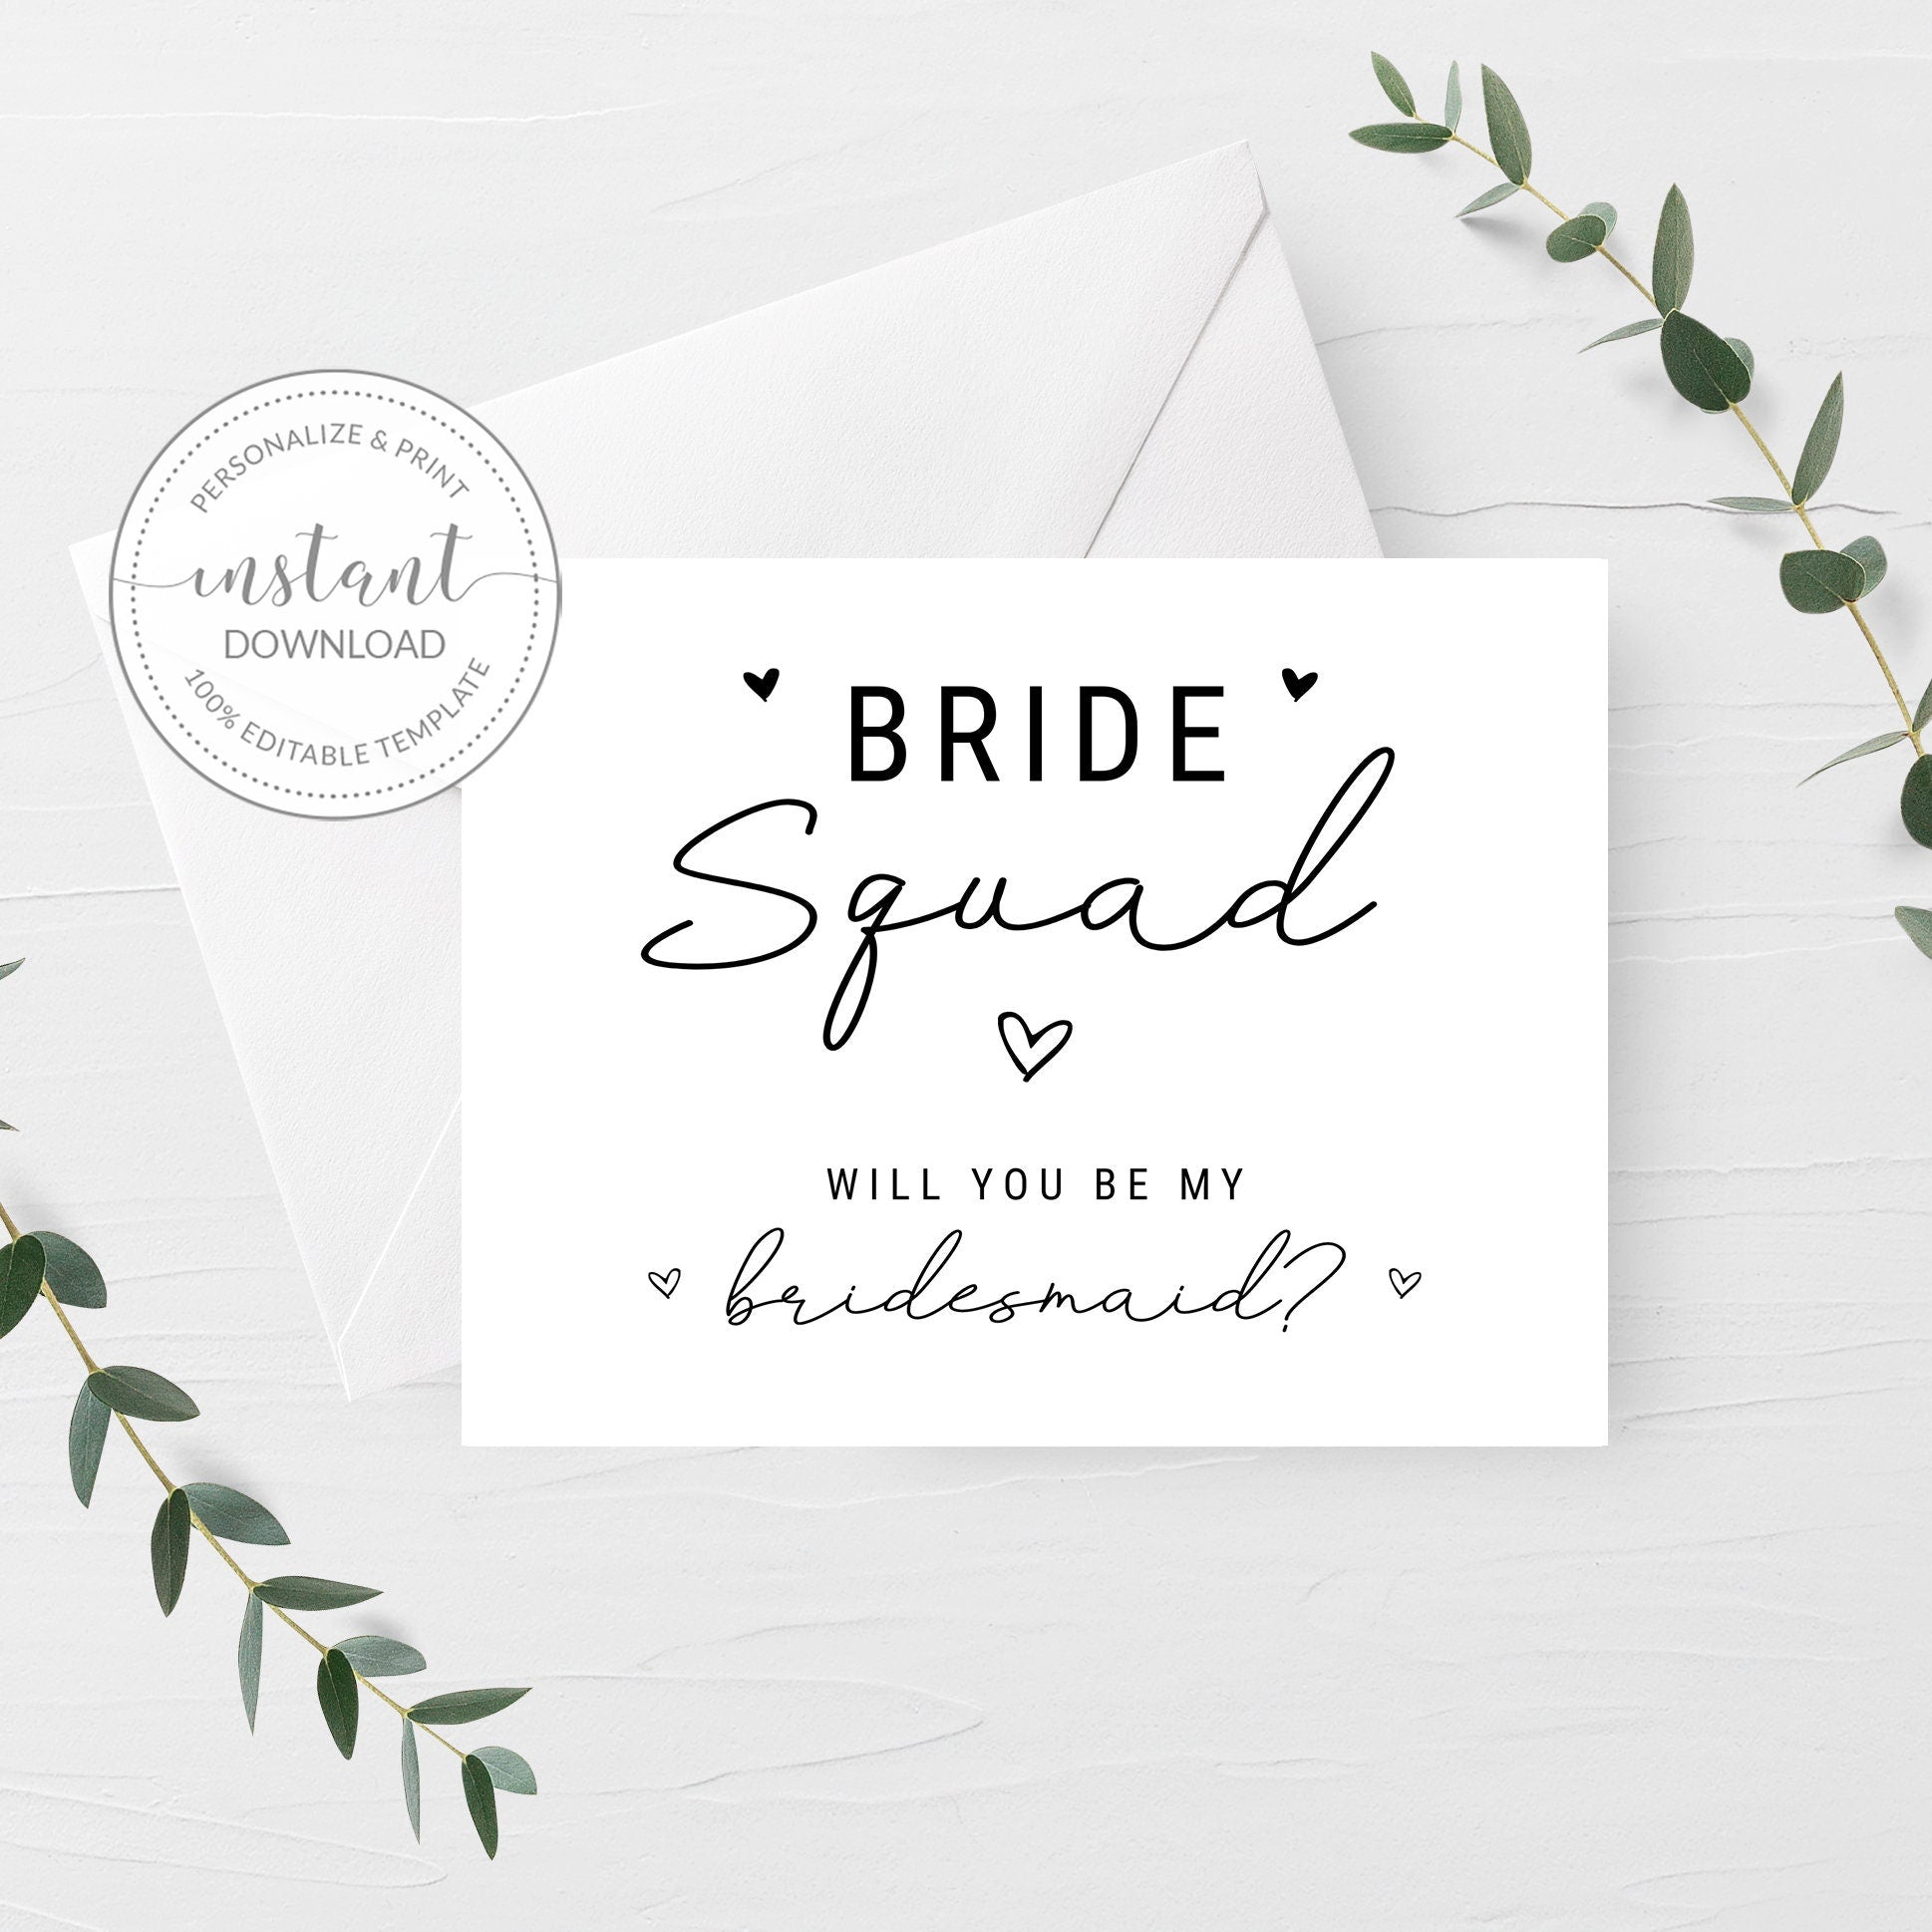 Bridesmaid Proposal Card Printable, Will You Be My Bridesmaid Ask Card, Bride Squad Card Template, DIGITAL DOWNLOAD, A2 Size